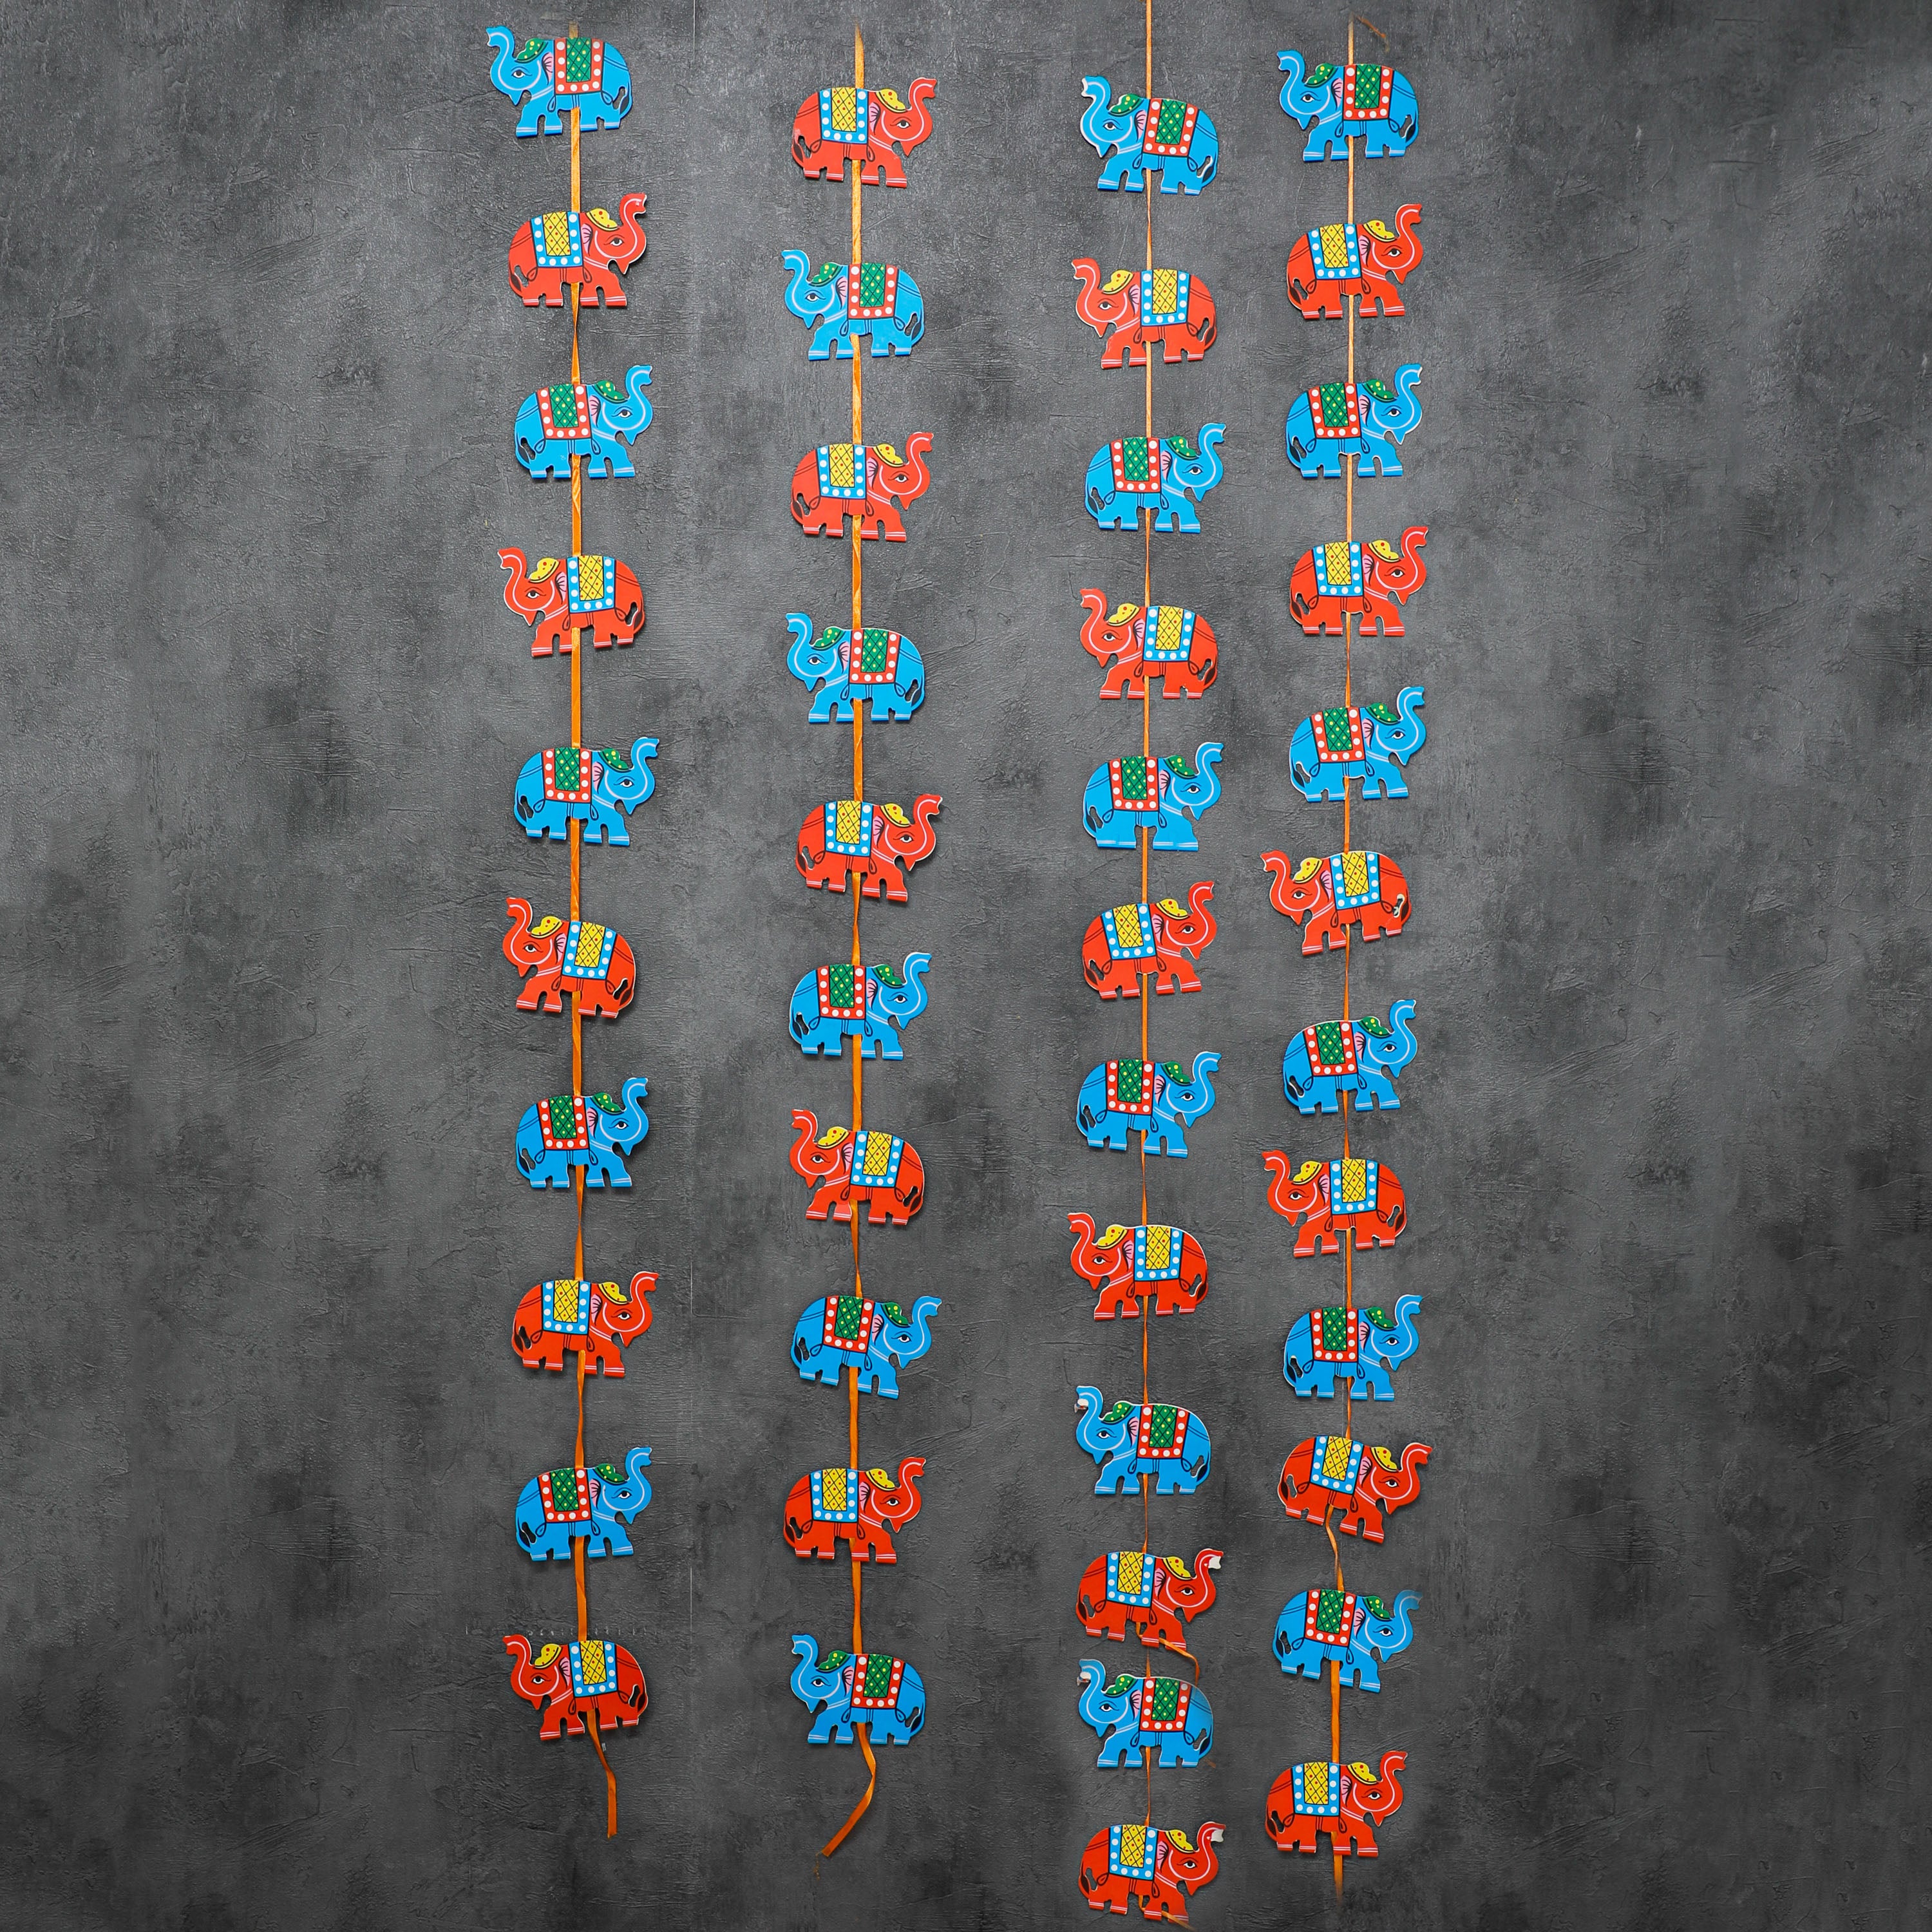 Decorative elephant wall hanging garland Handmade in India by rural women artisans